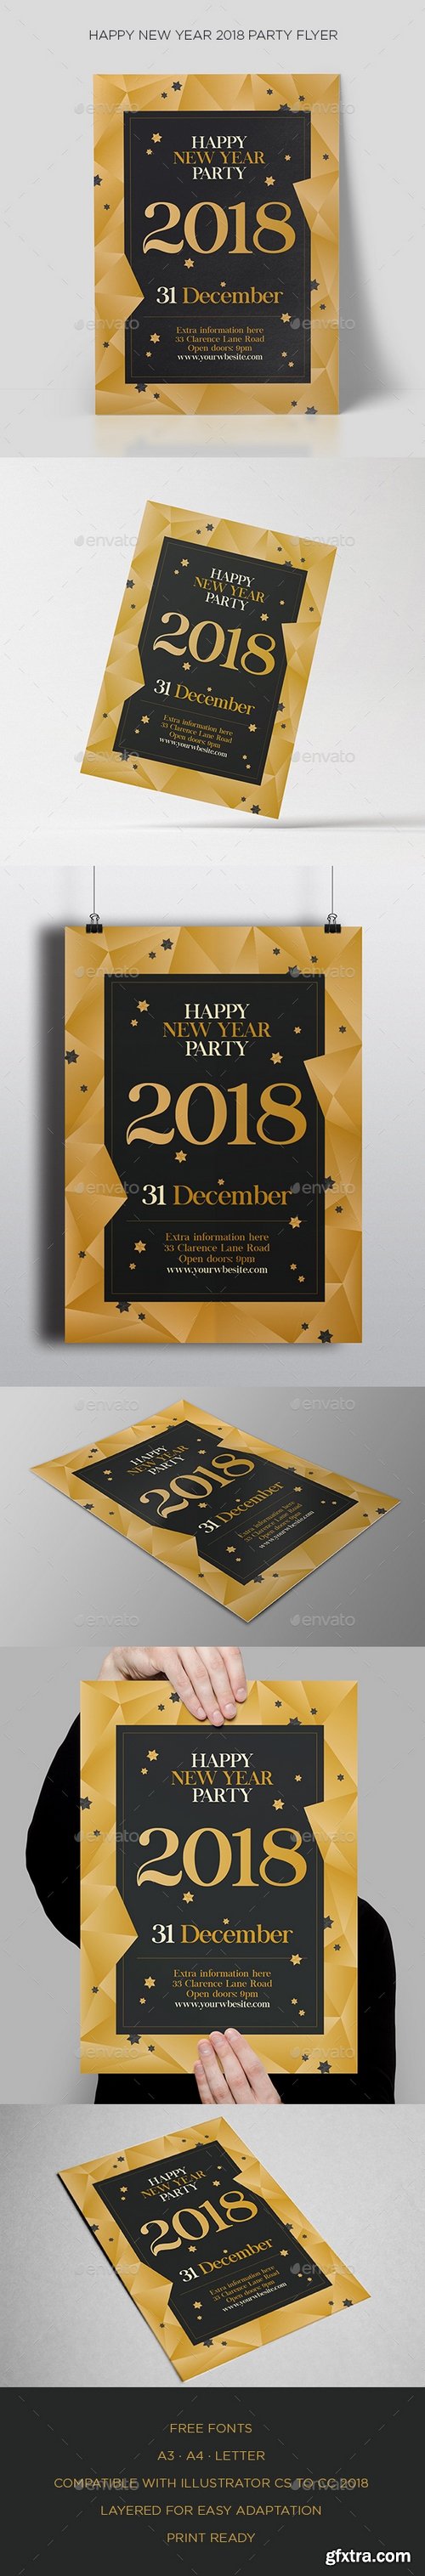 Graphicriver - Happy New Year 2018 Party Flyer 21090650